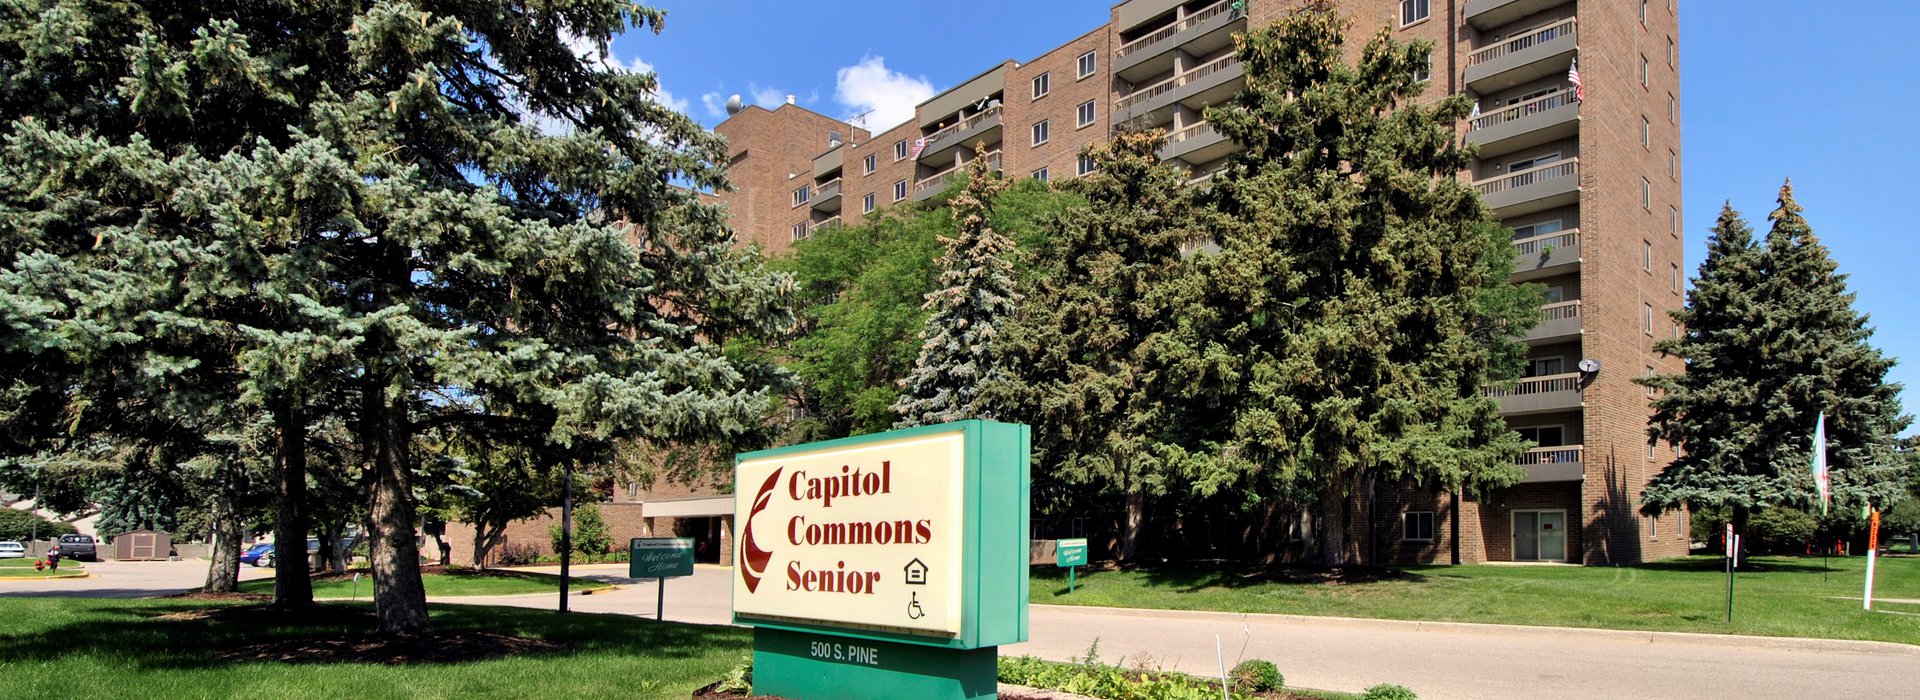 Capitol Commons Senior building and signage